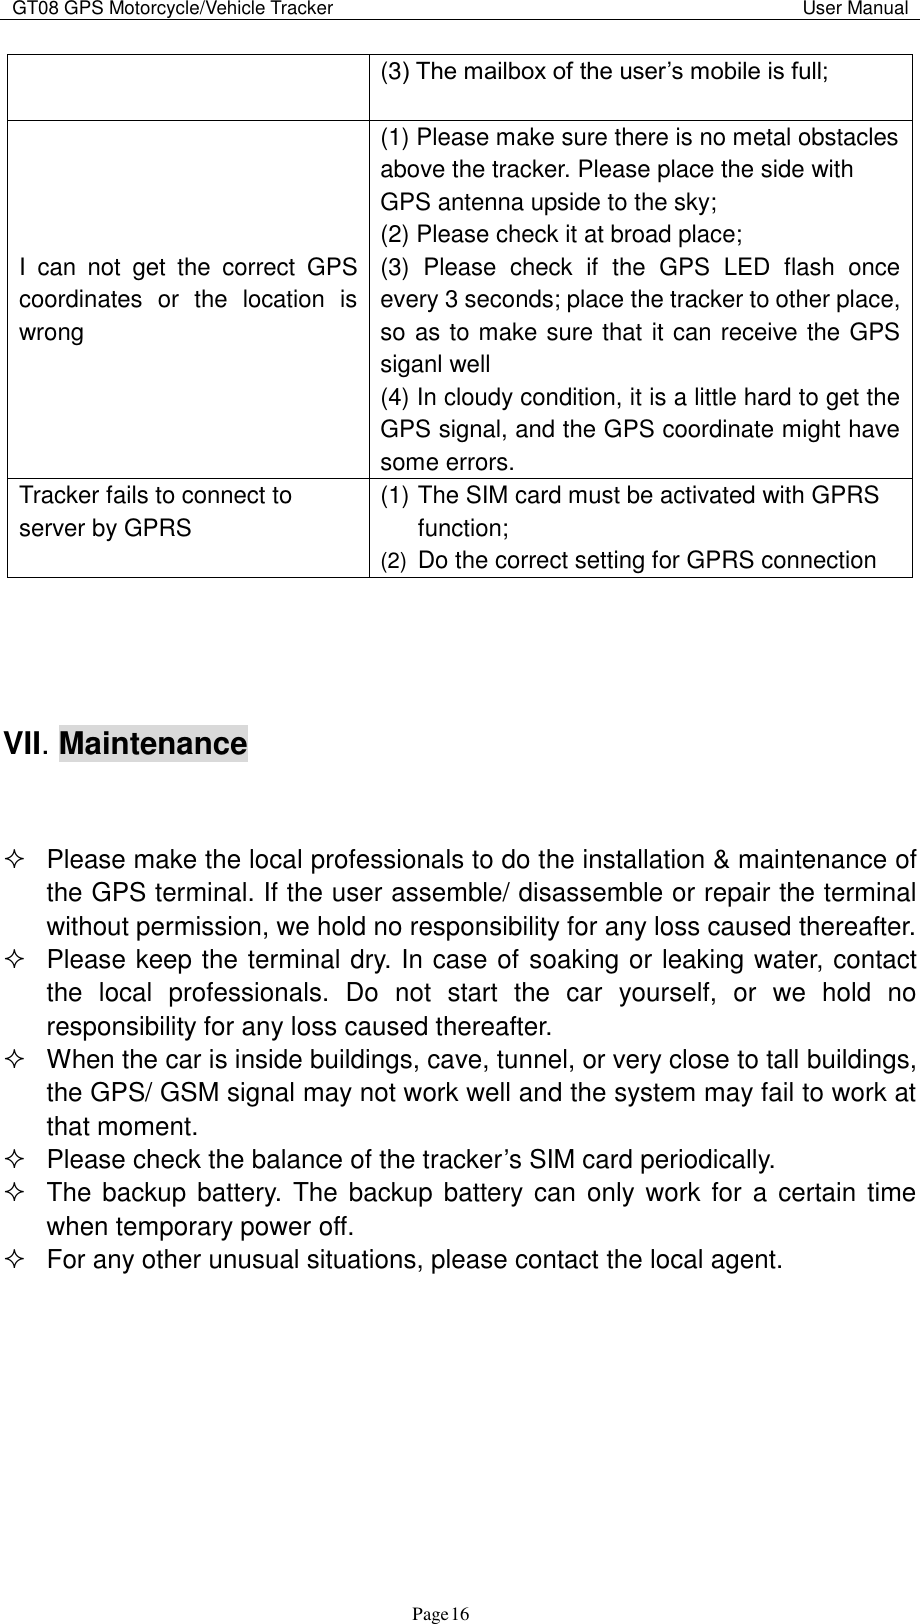 GT08 GPS Motorcycle/Vehicle Tracker                                                                                           User Manual                                     Page   16 (3) The mailbox of the user‟s mobile is full; I  can  not  get  the  correct  GPS coordinates  or  the  location  is wrong (1) Please make sure there is no metal obstacles above the tracker. Please place the side with GPS antenna upside to the sky; (2) Please check it at broad place; (3)  Please  check  if  the  GPS  LED  flash  once every 3 seconds; place the tracker to other place, so as to make sure that it can receive the GPS siganl well (4) In cloudy condition, it is a little hard to get the GPS signal, and the GPS coordinate might have some errors.   Tracker fails to connect to server by GPRS (1) The SIM card must be activated with GPRS function; (2)  Do the correct setting for GPRS connection     VII. Maintenance     Please make the local professionals to do the installation &amp; maintenance of the GPS terminal. If the user assemble/ disassemble or repair the terminal without permission, we hold no responsibility for any loss caused thereafter.   Please keep the terminal dry. In case of soaking or leaking water, contact the  local  professionals.  Do  not  start  the  car  yourself,  or  we  hold  no responsibility for any loss caused thereafter.   When the car is inside buildings, cave, tunnel, or very close to tall buildings, the GPS/ GSM signal may not work well and the system may fail to work at that moment.     Please check the balance of the tracker‟s SIM card periodically.   The backup  battery.  The backup  battery can only work for  a  certain time when temporary power off.     For any other unusual situations, please contact the local agent.    